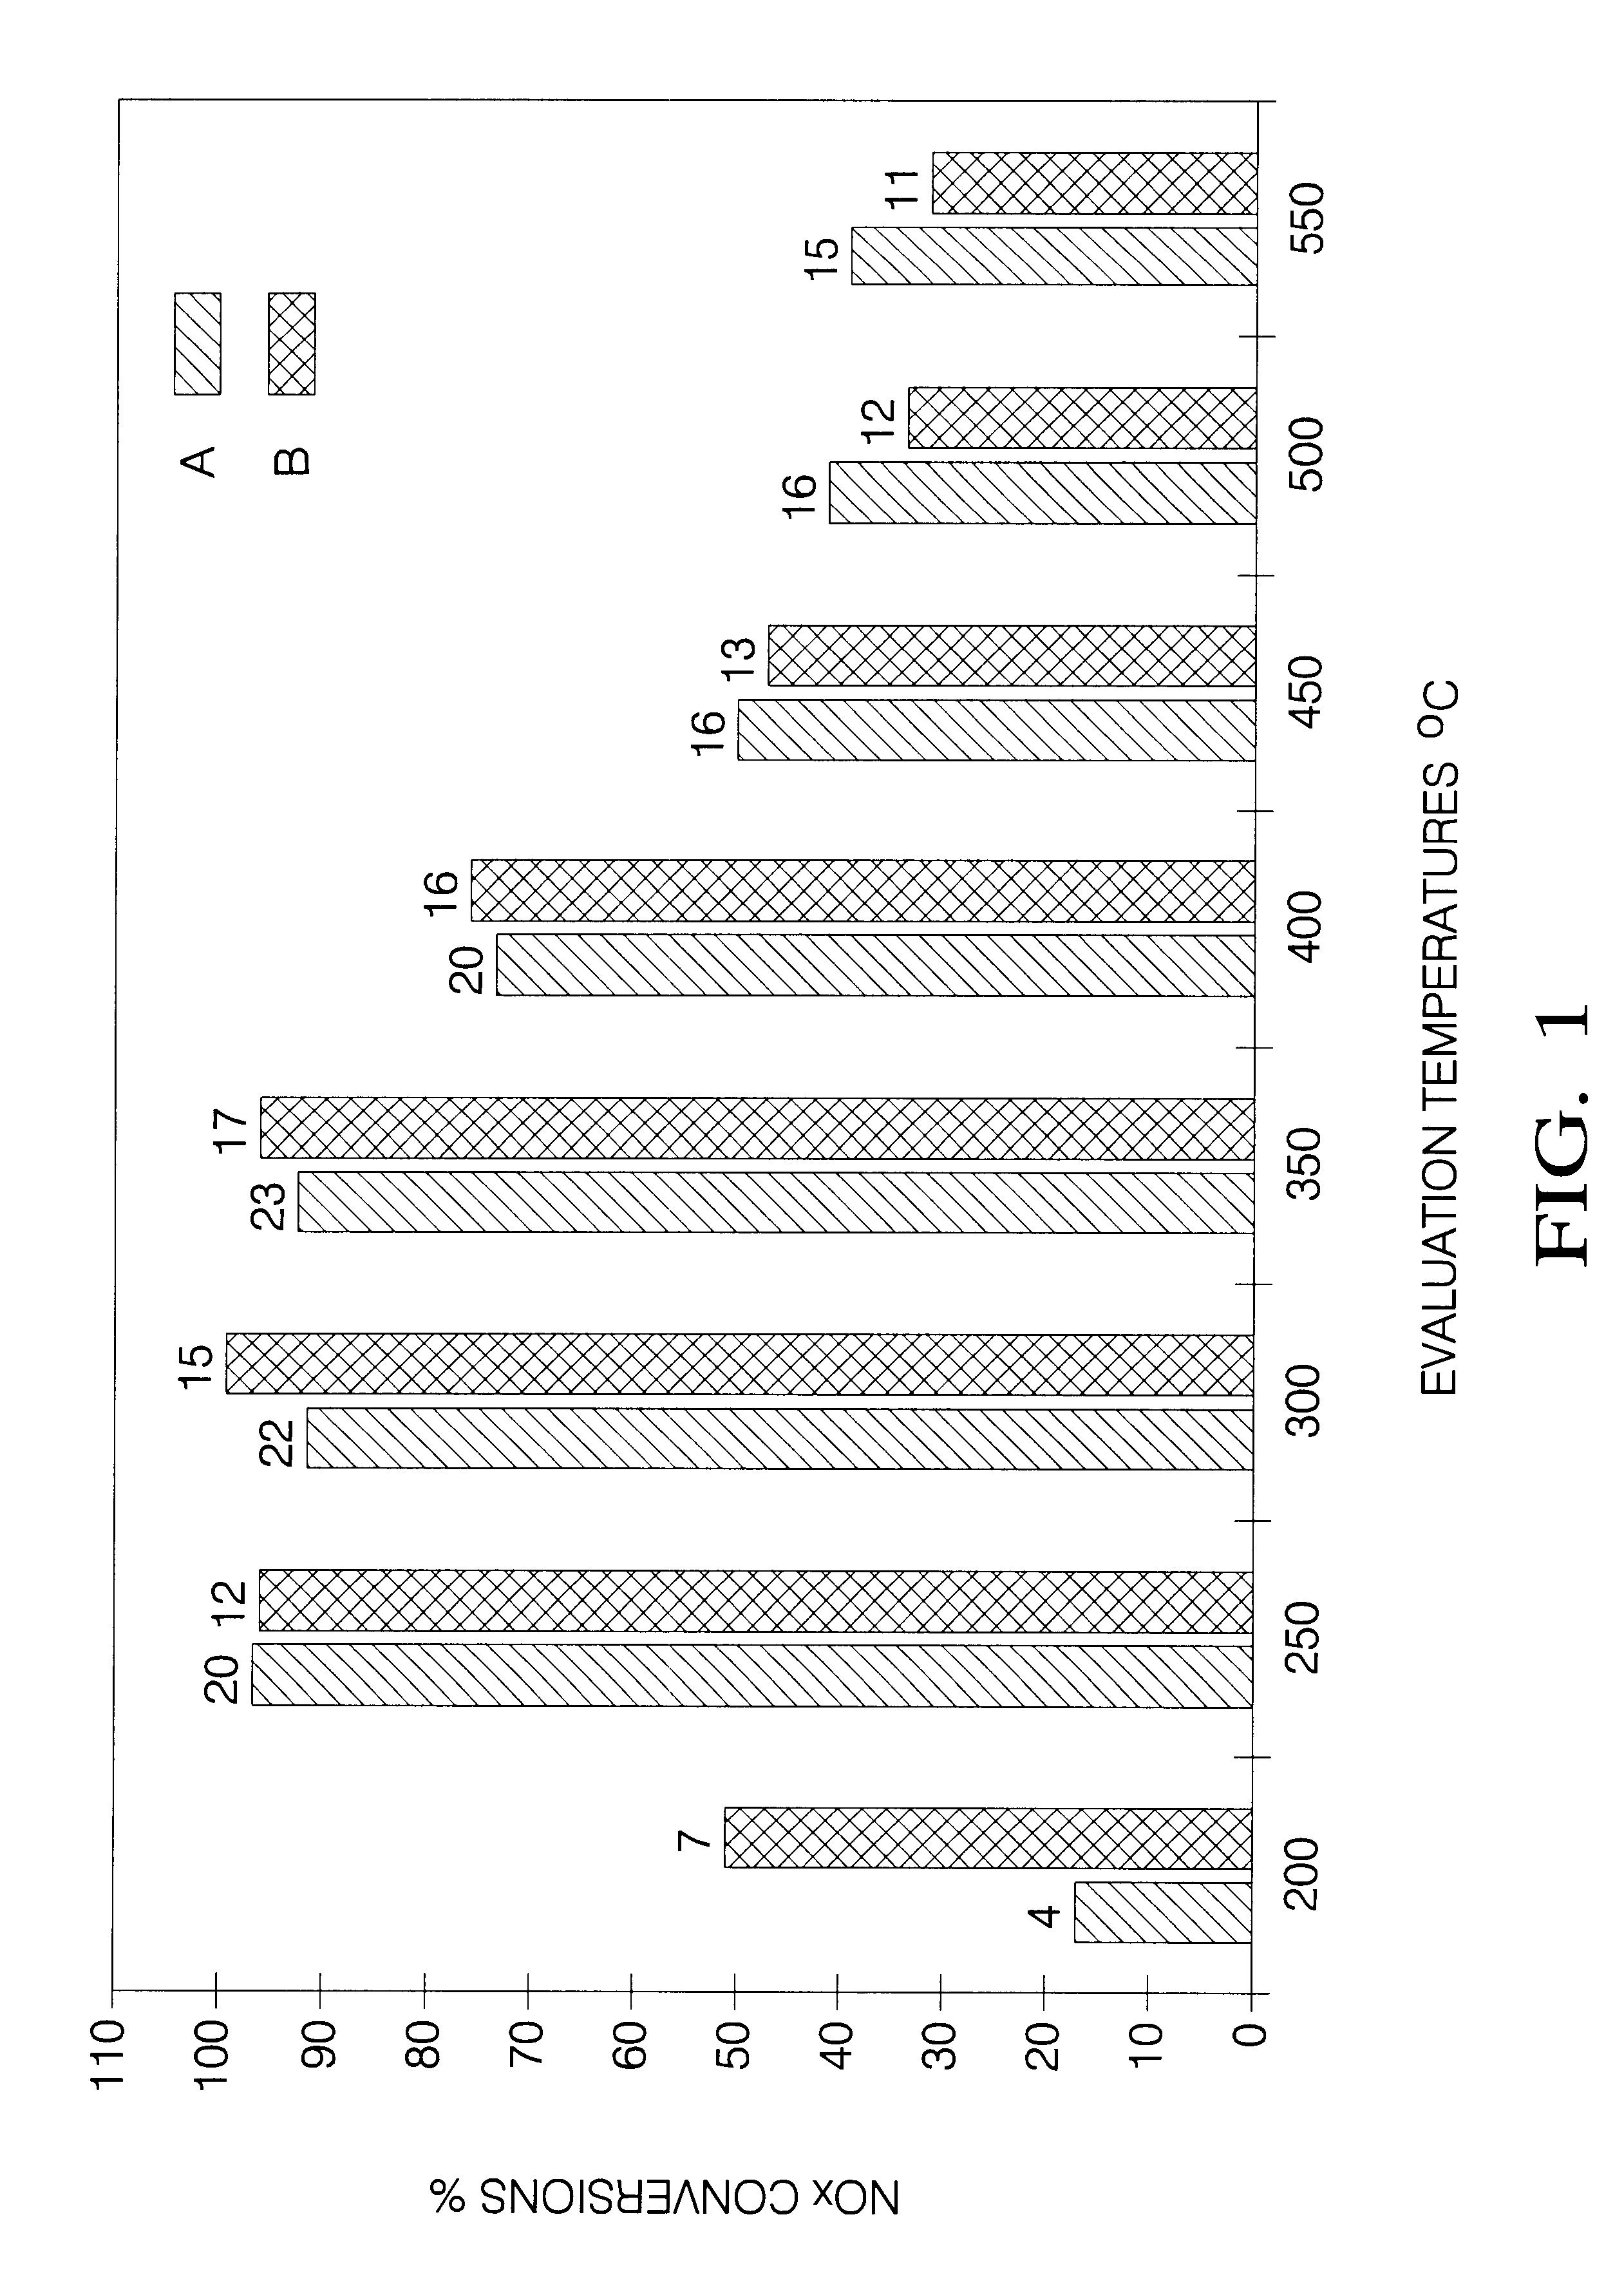 NO2 abatement composition with enhanced sulfur resistance